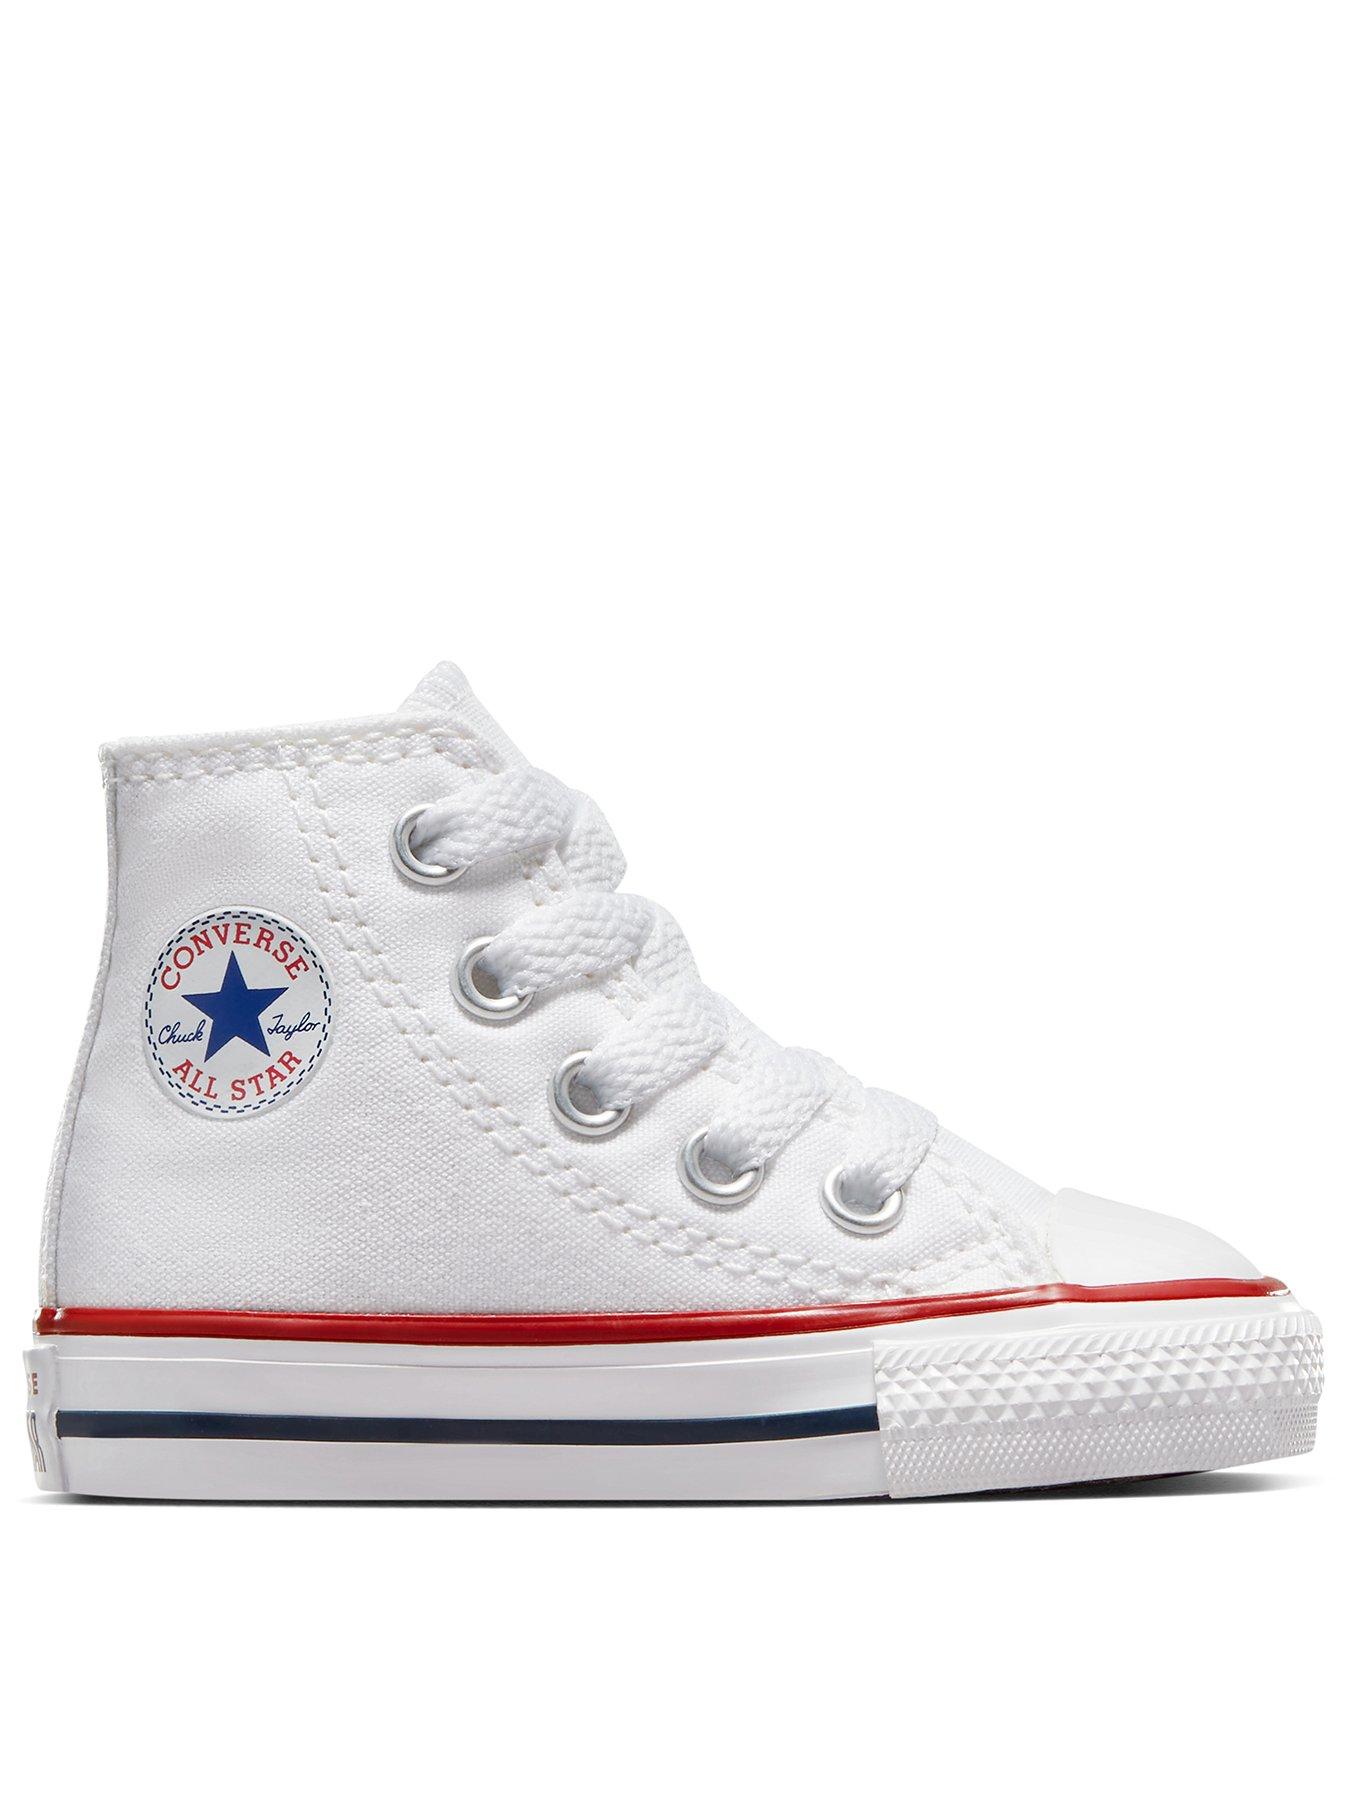 converse baby shoes uk